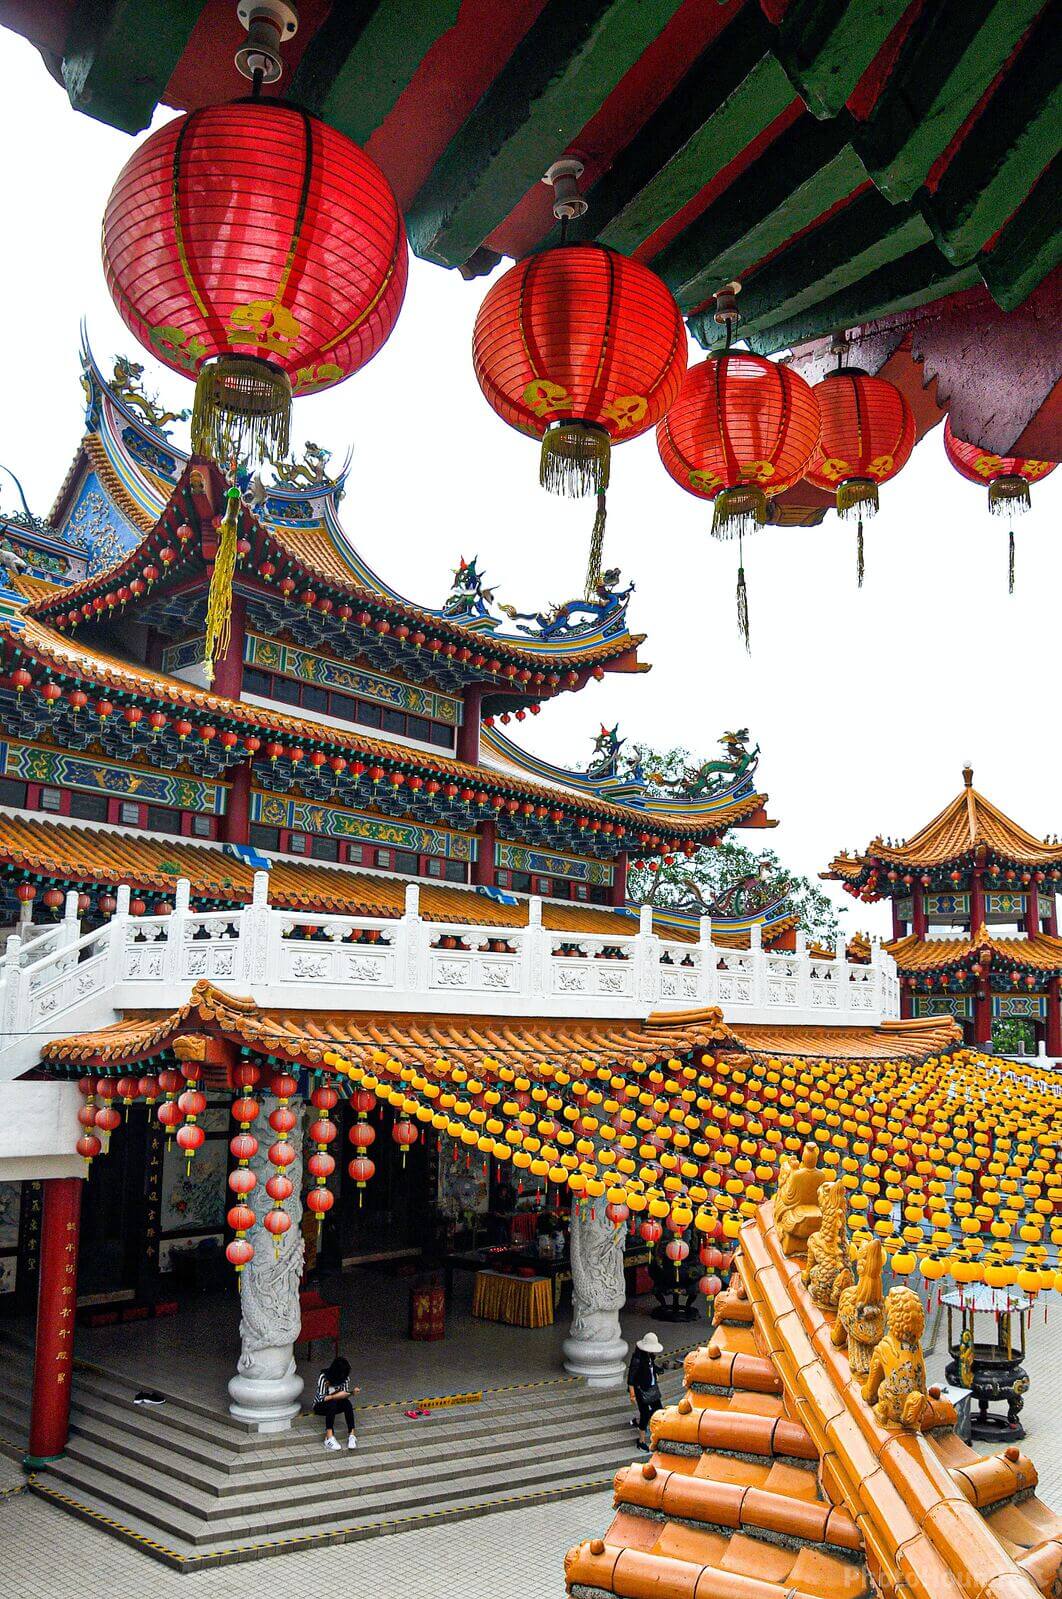 Image of Thean Hou Temple by Team PhotoHound